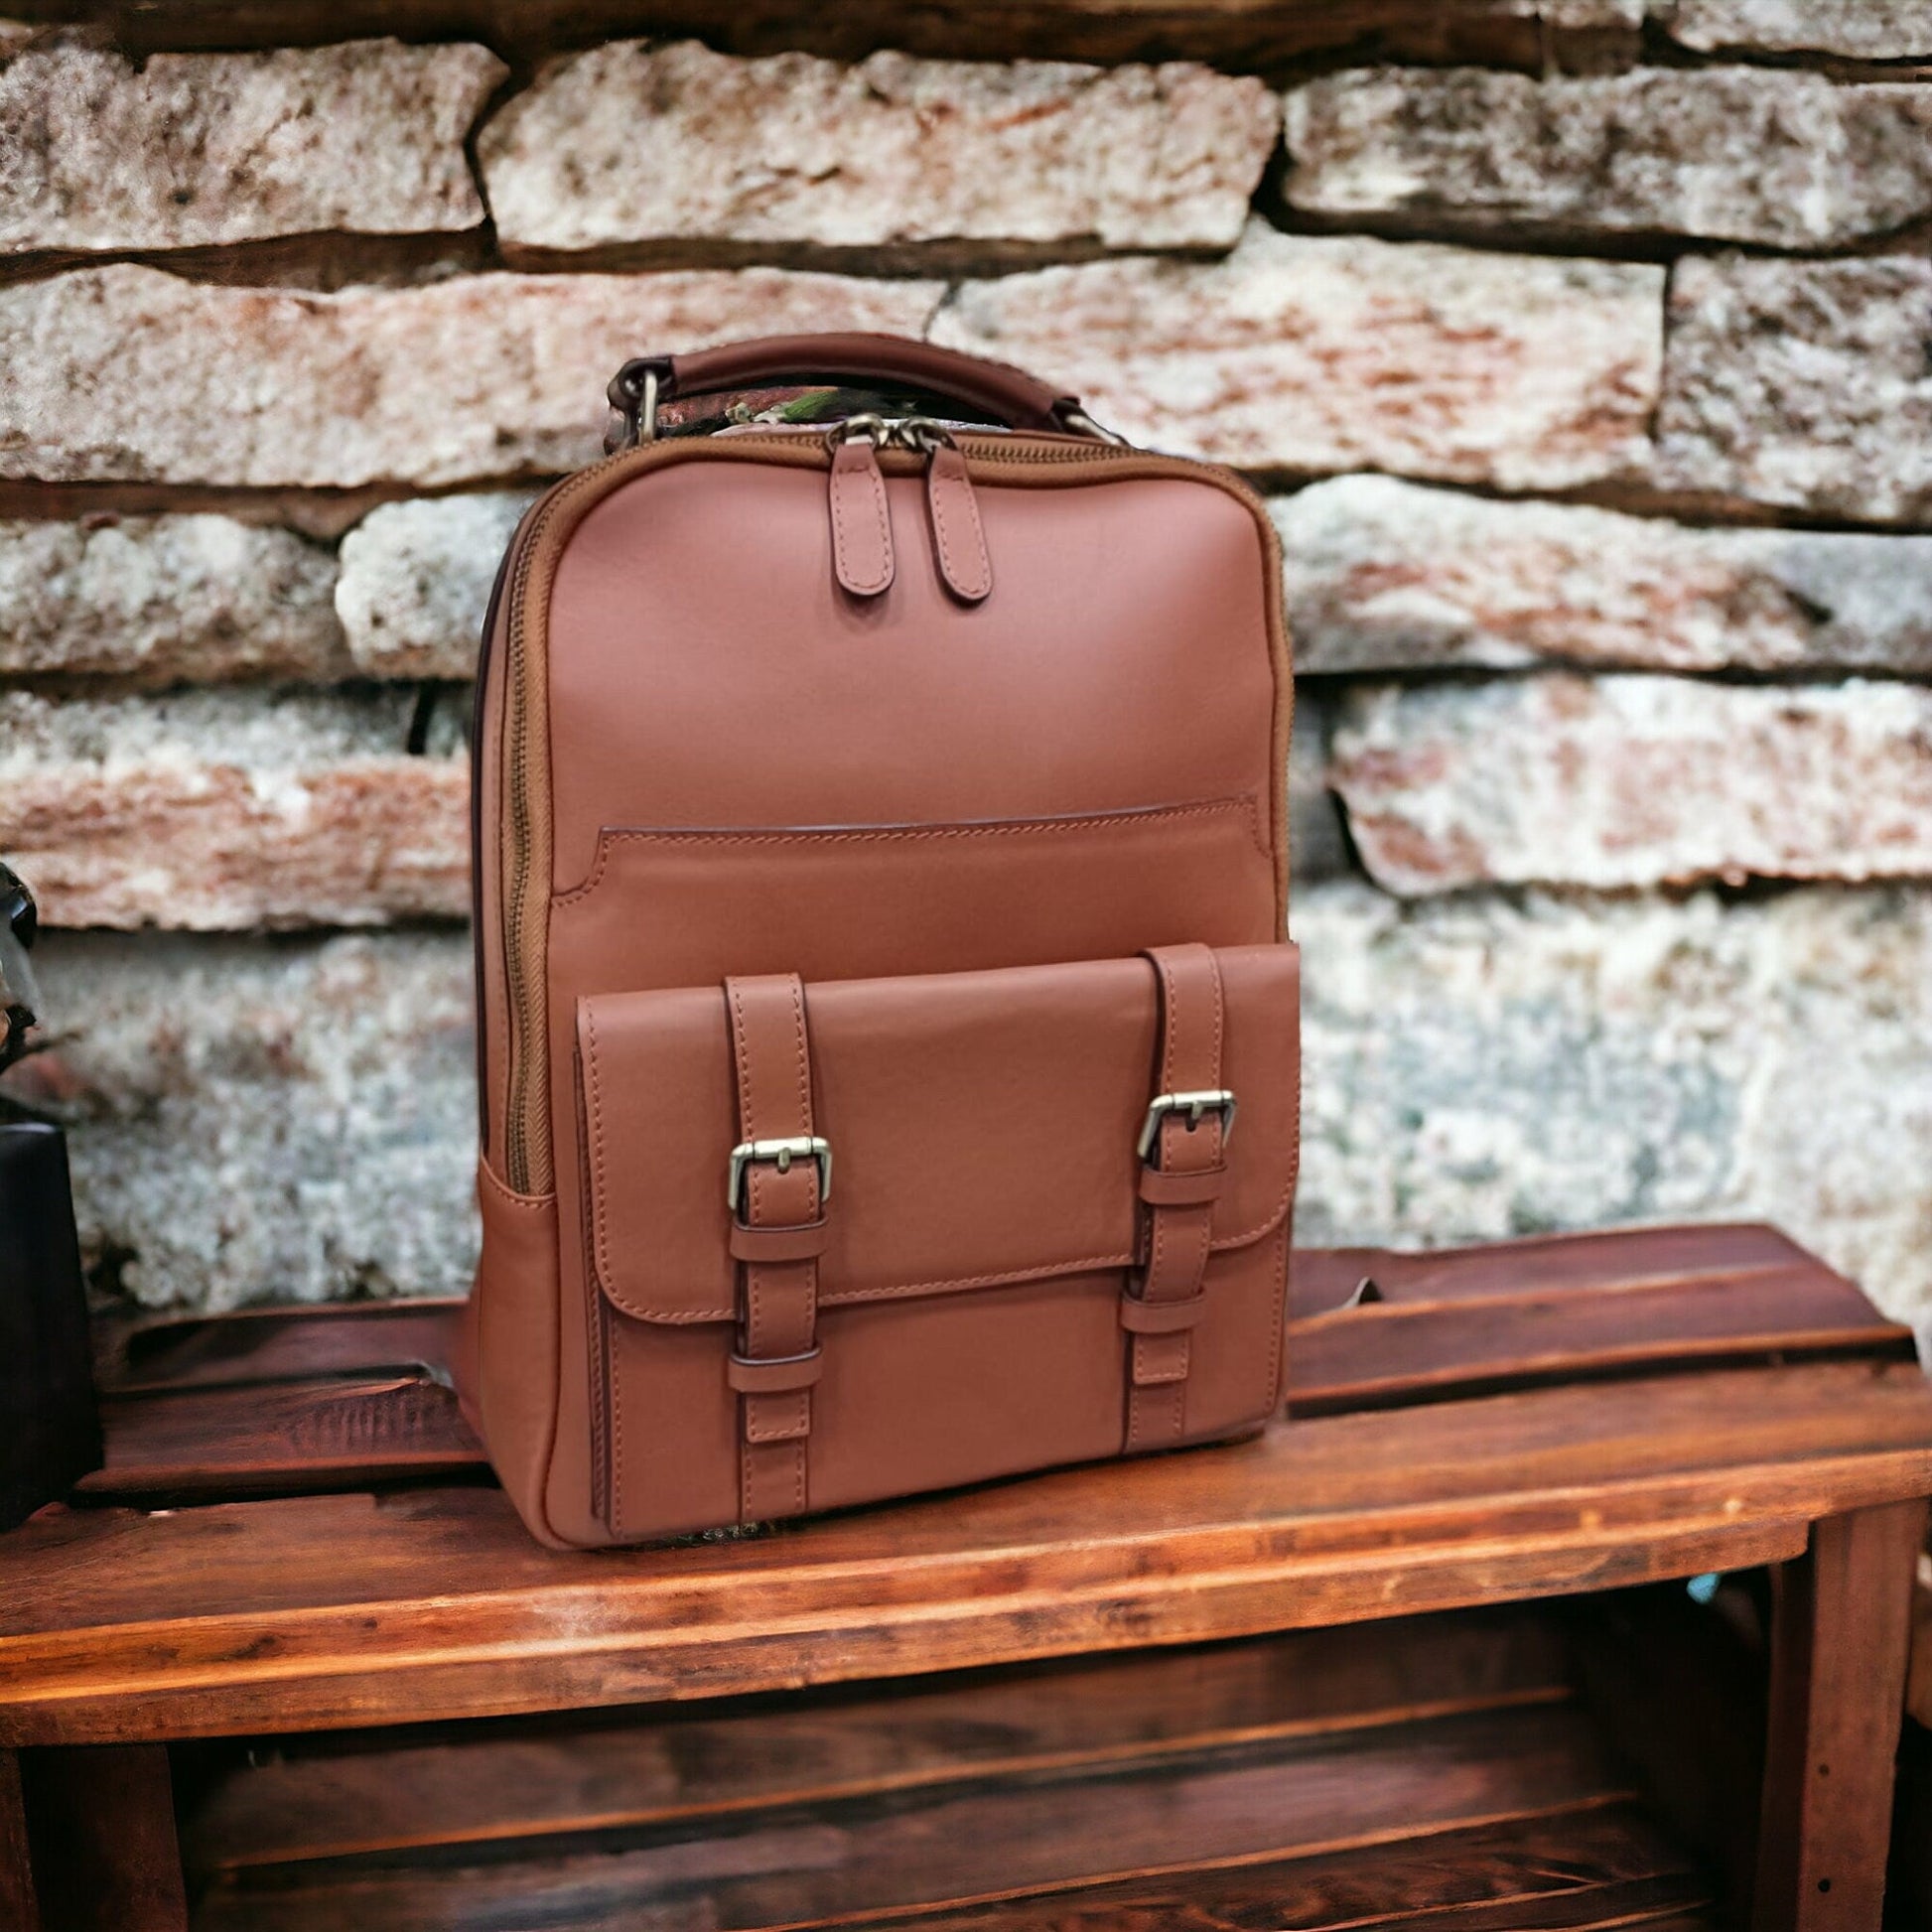 Full Leather Handmade Daypack, Brown,Tan,Black, Blue color, 20-30 Liter options. Laptop pocket premimum leather, Citypack, Daily use  99percenthandmade   